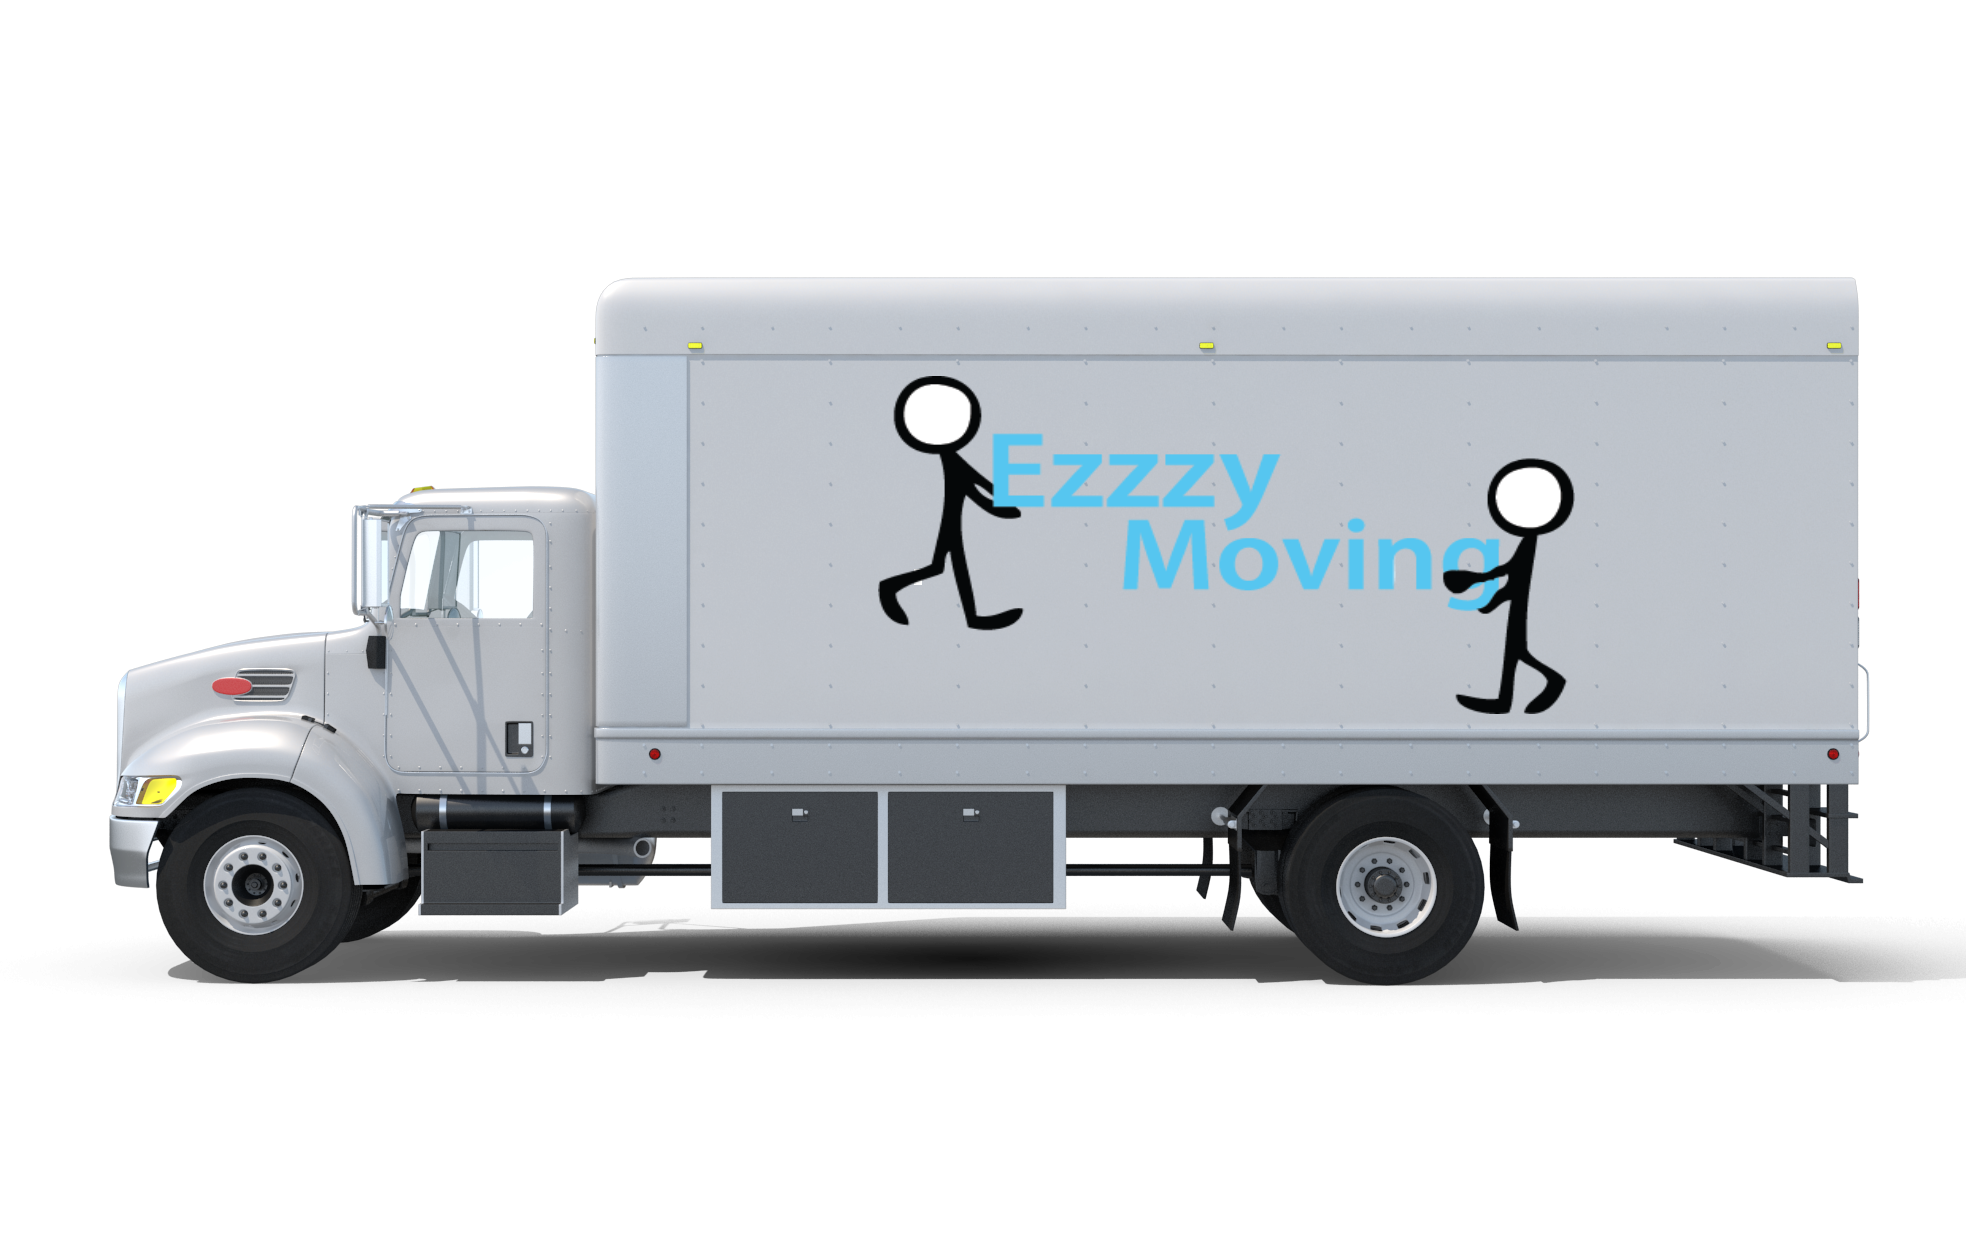 Professional Moving Services | Ezzzy Moving